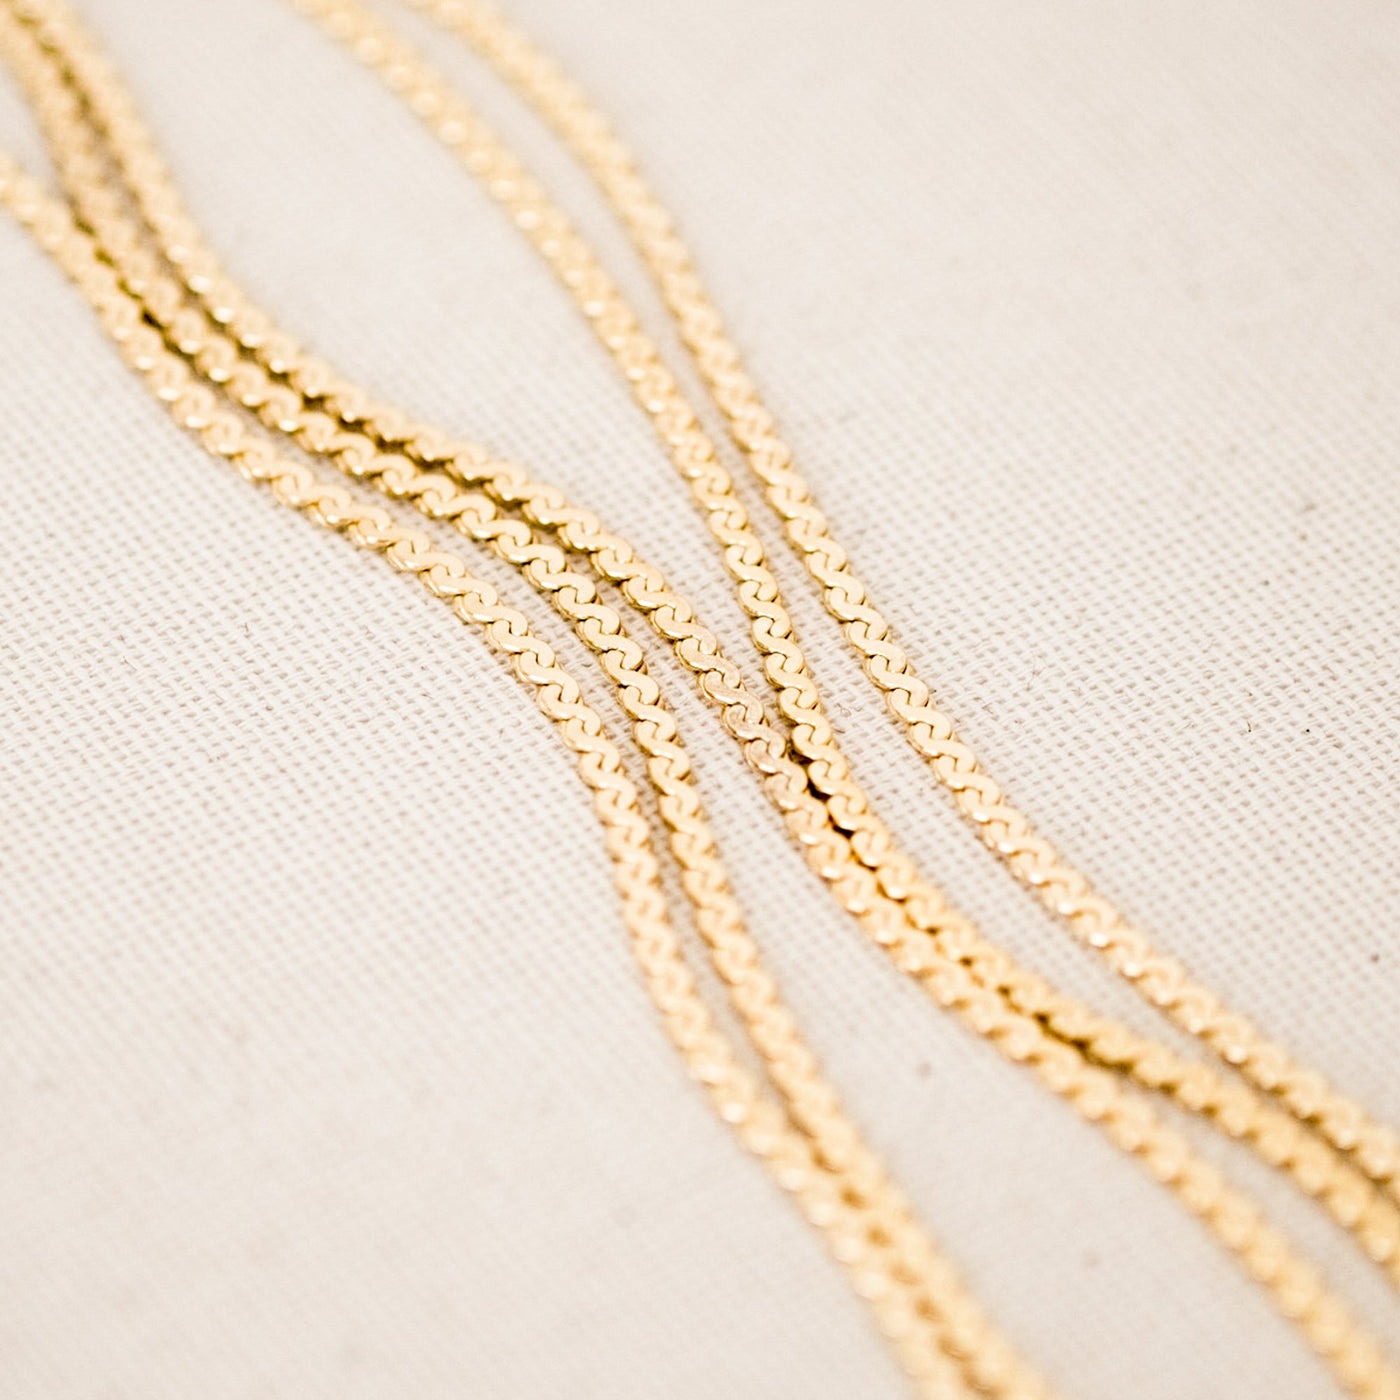 Serpentine Necklace | Simple & Dainty Jewelry